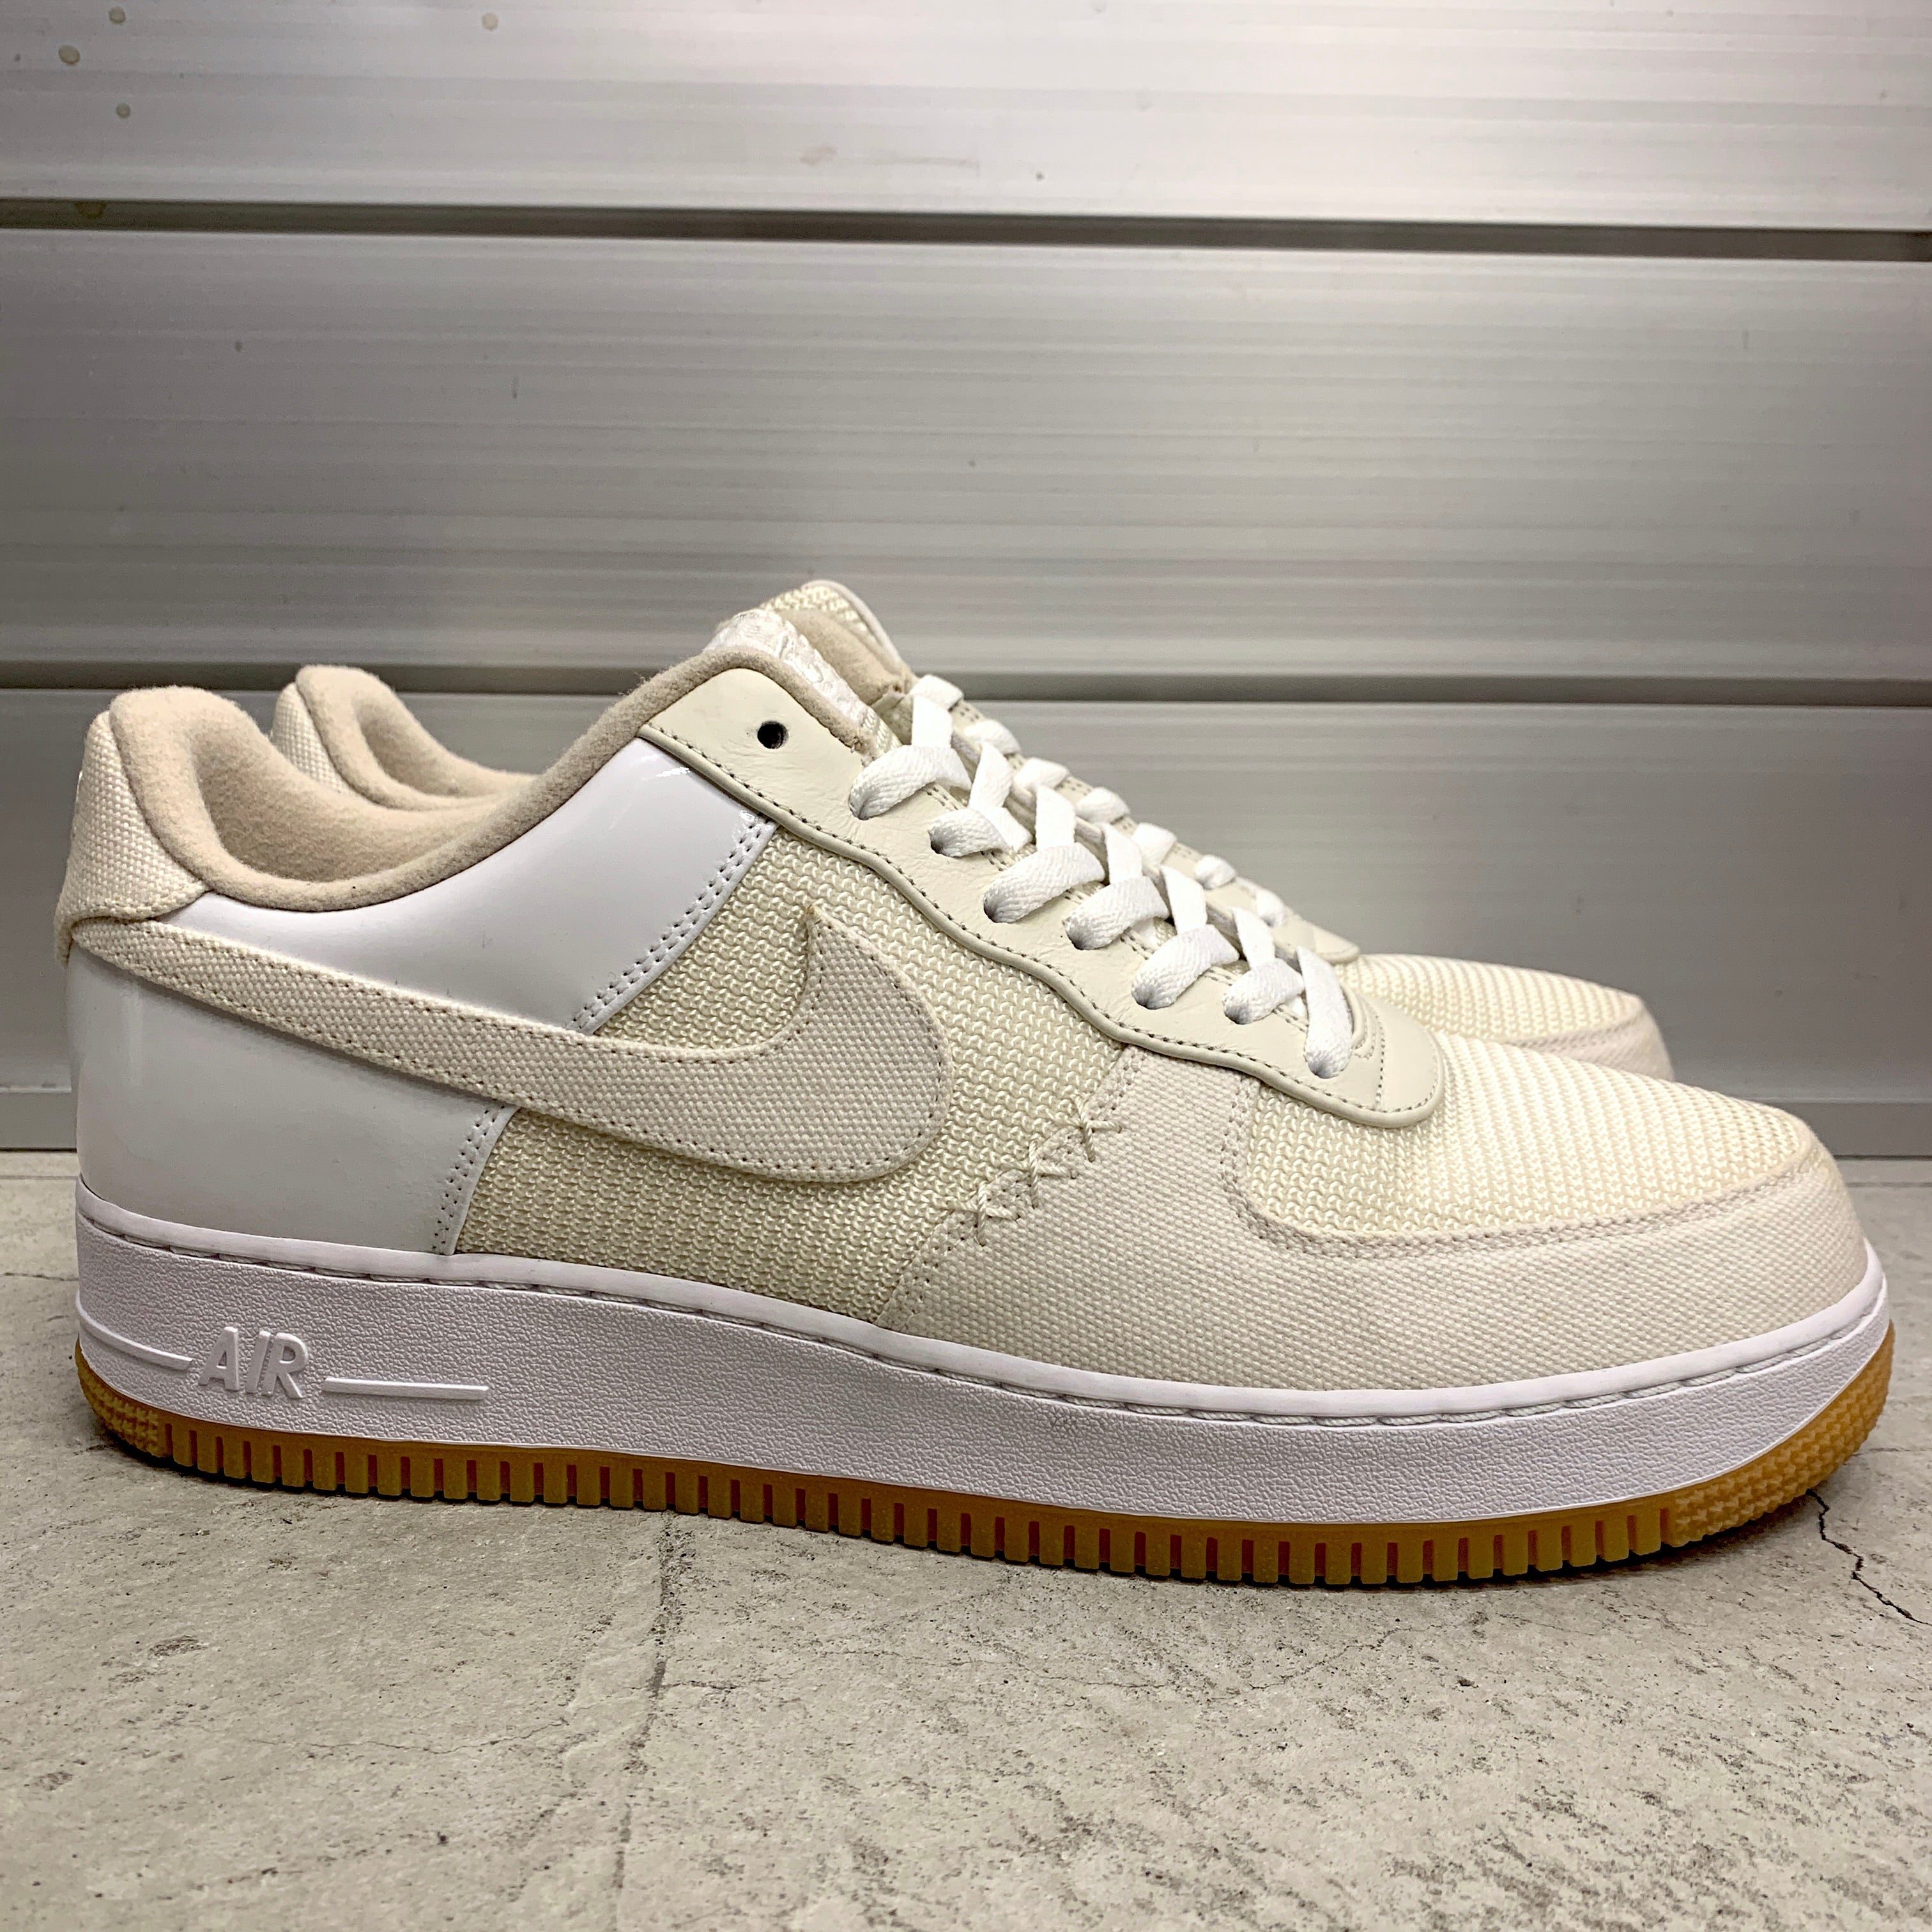 UNDEFEATED Nike Air Force 1 Low SP Total Orange 28cm DV5255-400-